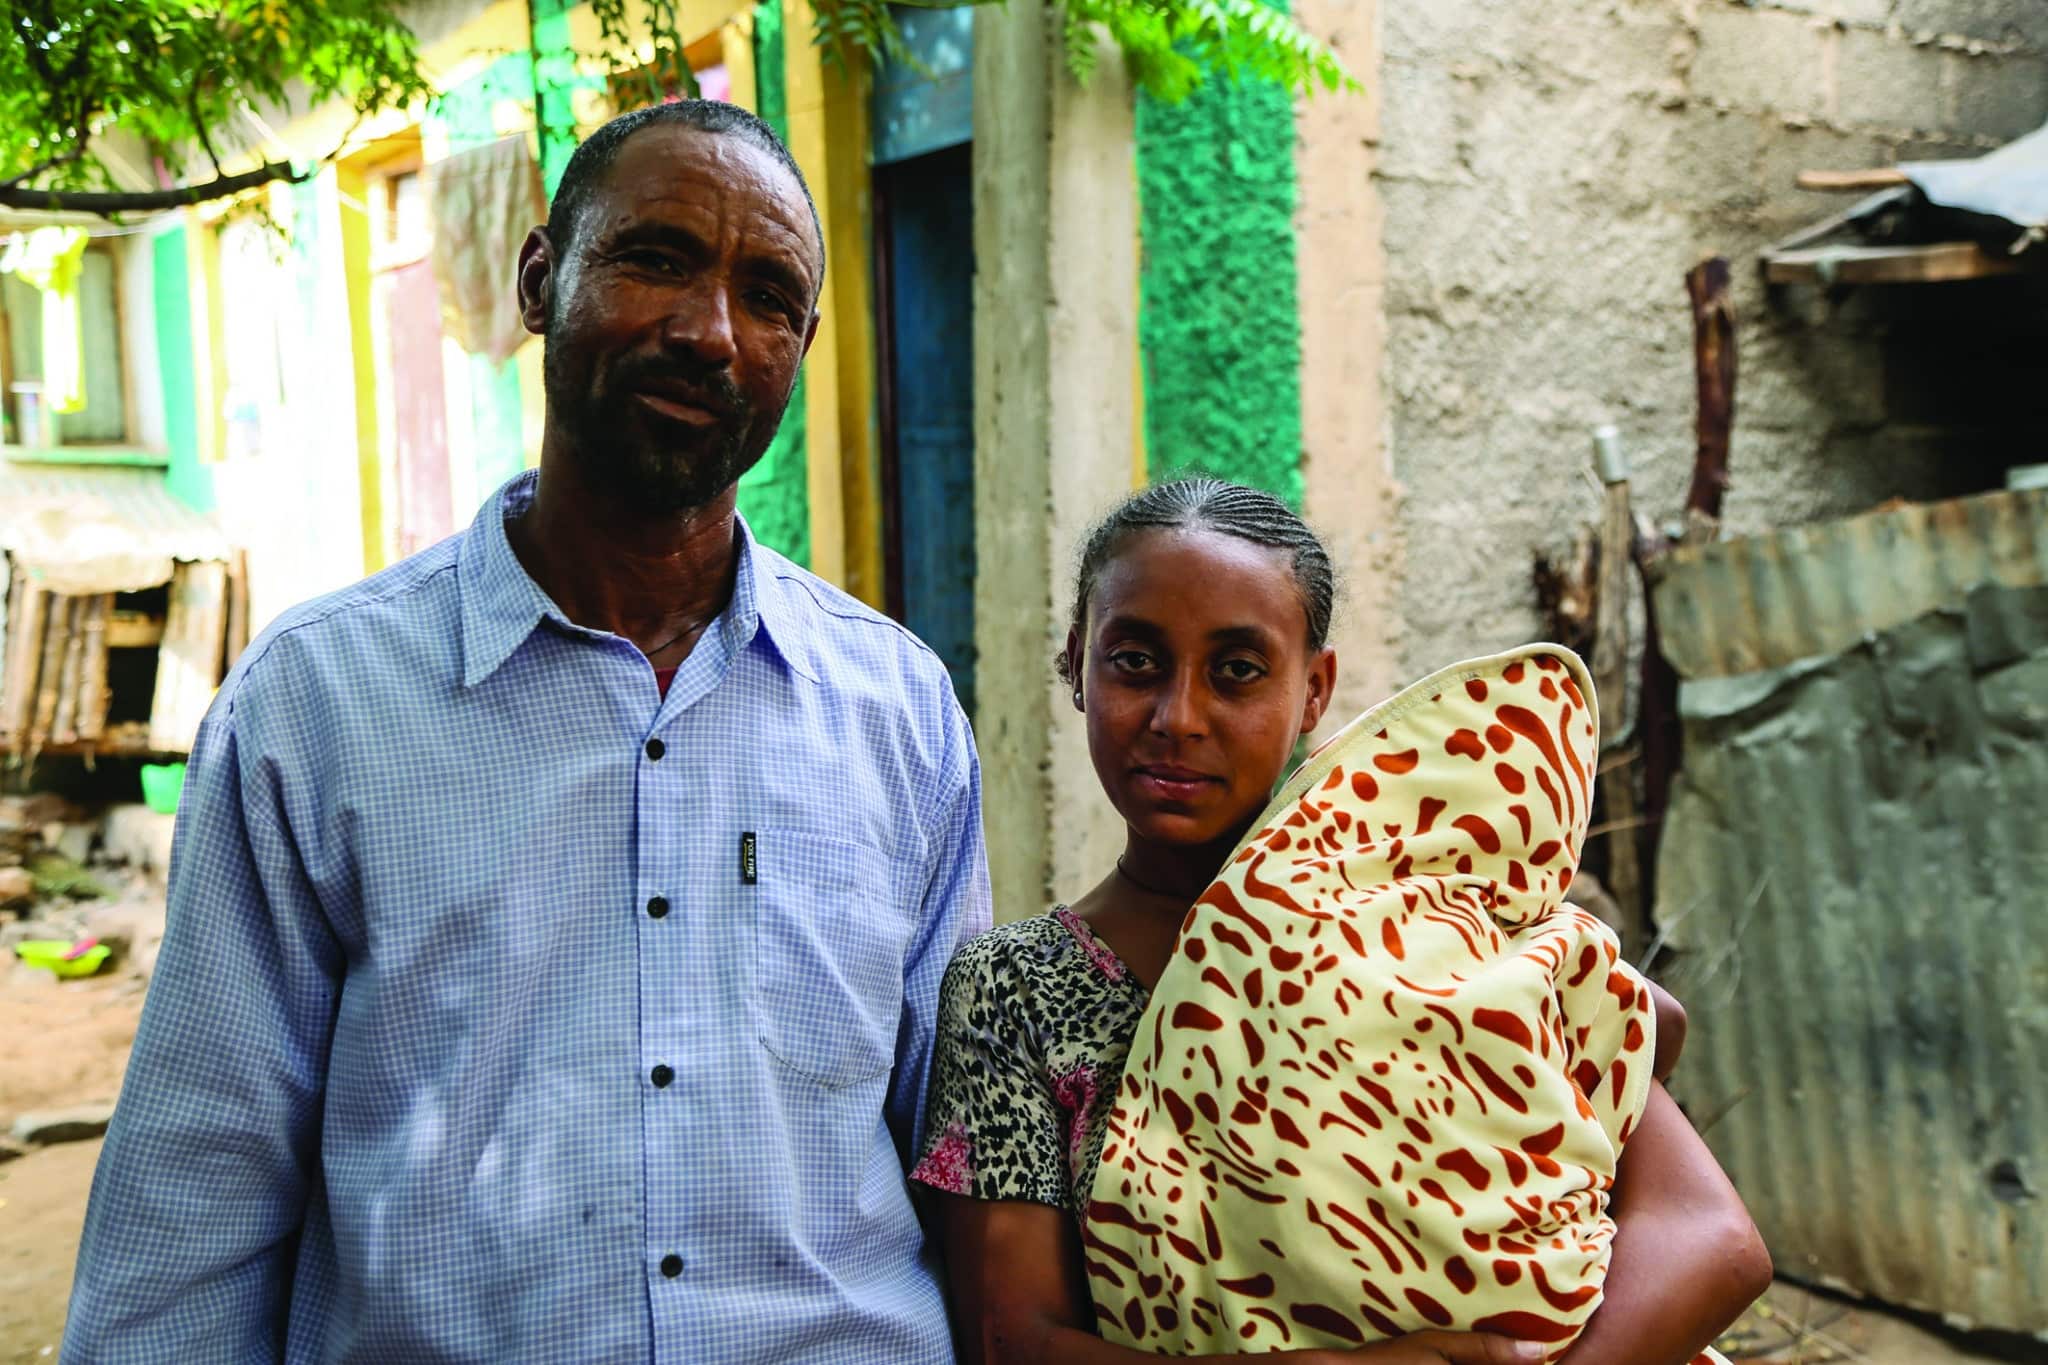 Salam, 20, pictured with her father-in-law, Tesfay. “I have no other relatives. They are the ones keeping me safe.”